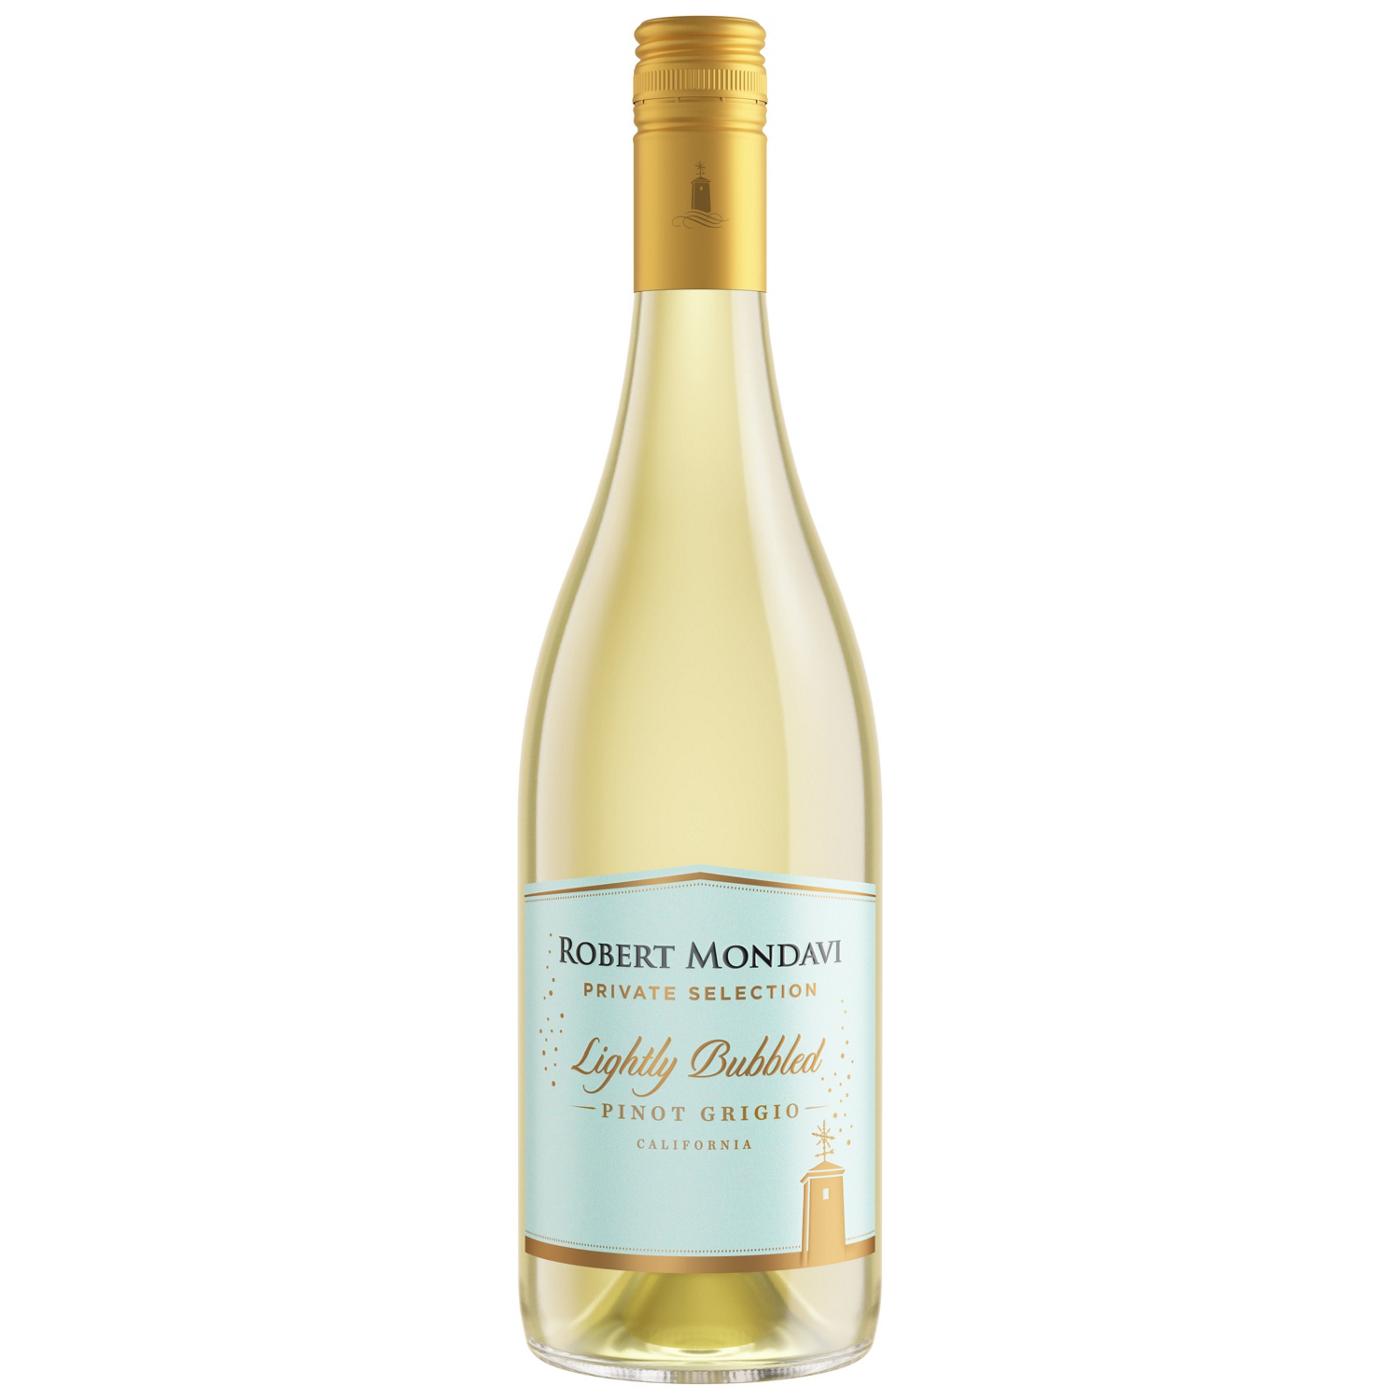 Robert Mondavi Private Selection Selection Lightly Bubbled Pinot Grigio White Wine 750 mL Bottle; image 1 of 11